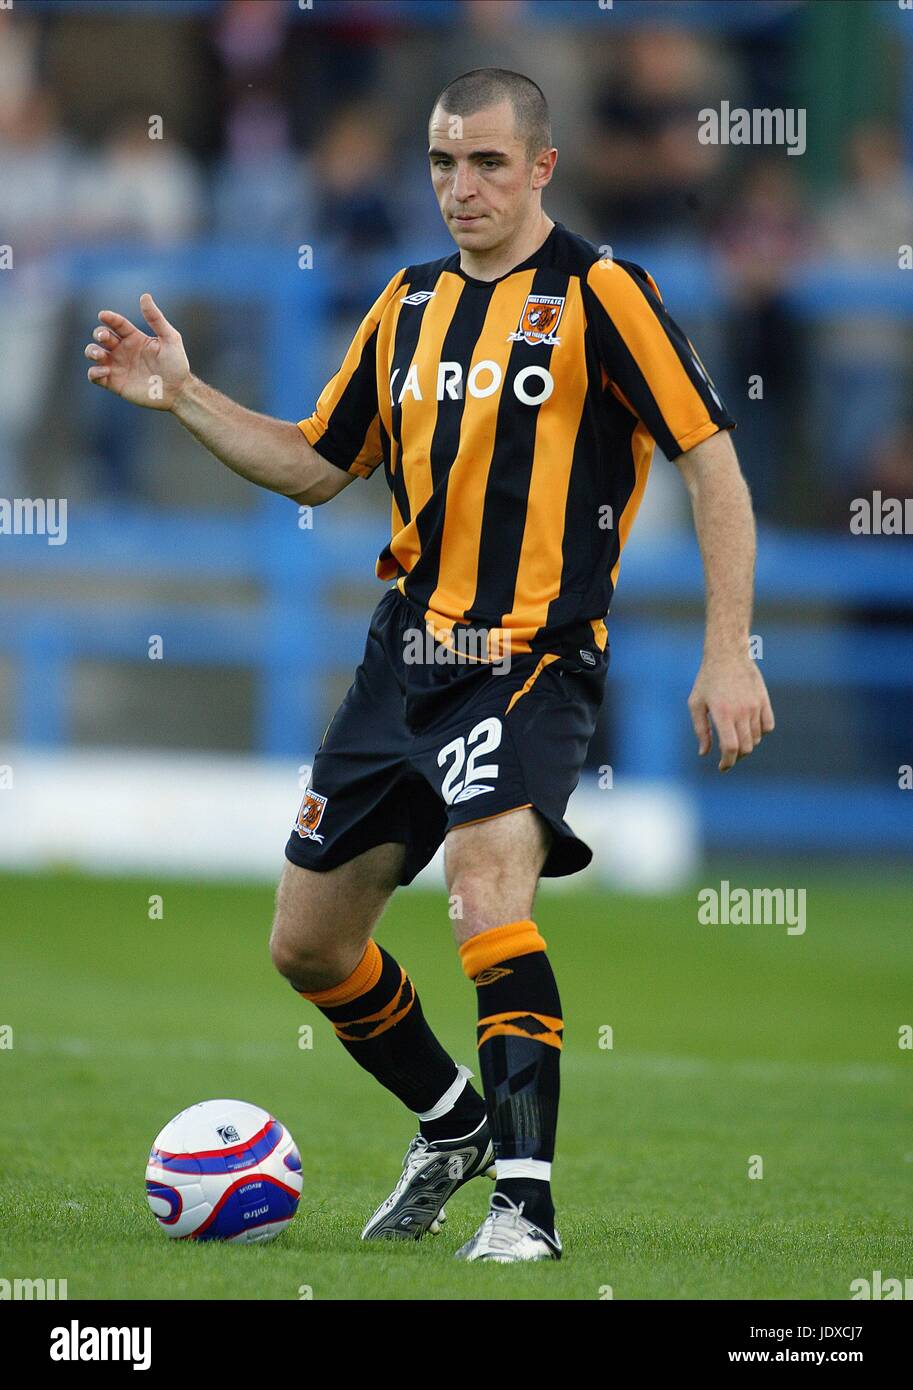 DEAN MARNEY HULL CITY FC SALTERGATE CHESTERFIELD ENGLAND 22 July 2008 ...